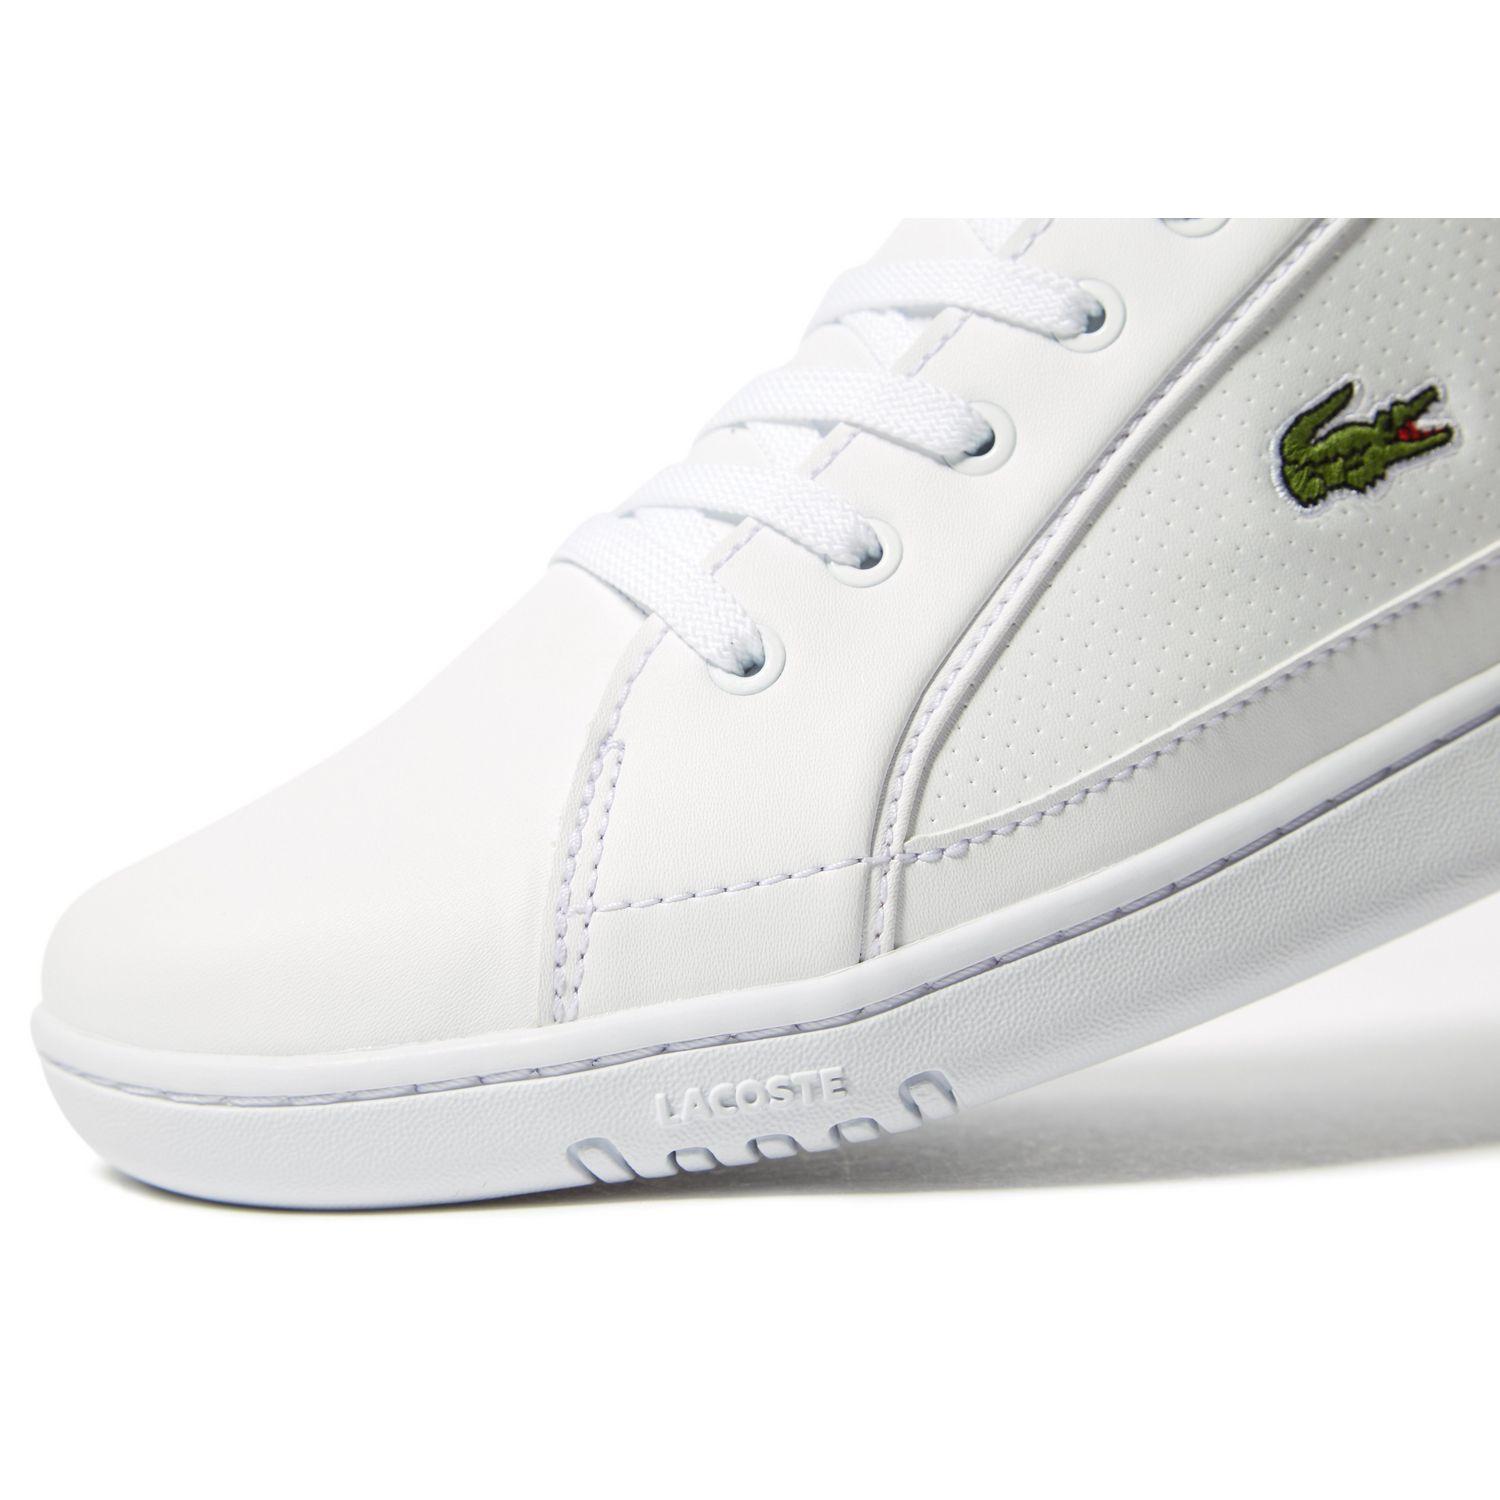 Lacoste Synthetic Deviation Ii in White/Brown (White) for Men - Lyst